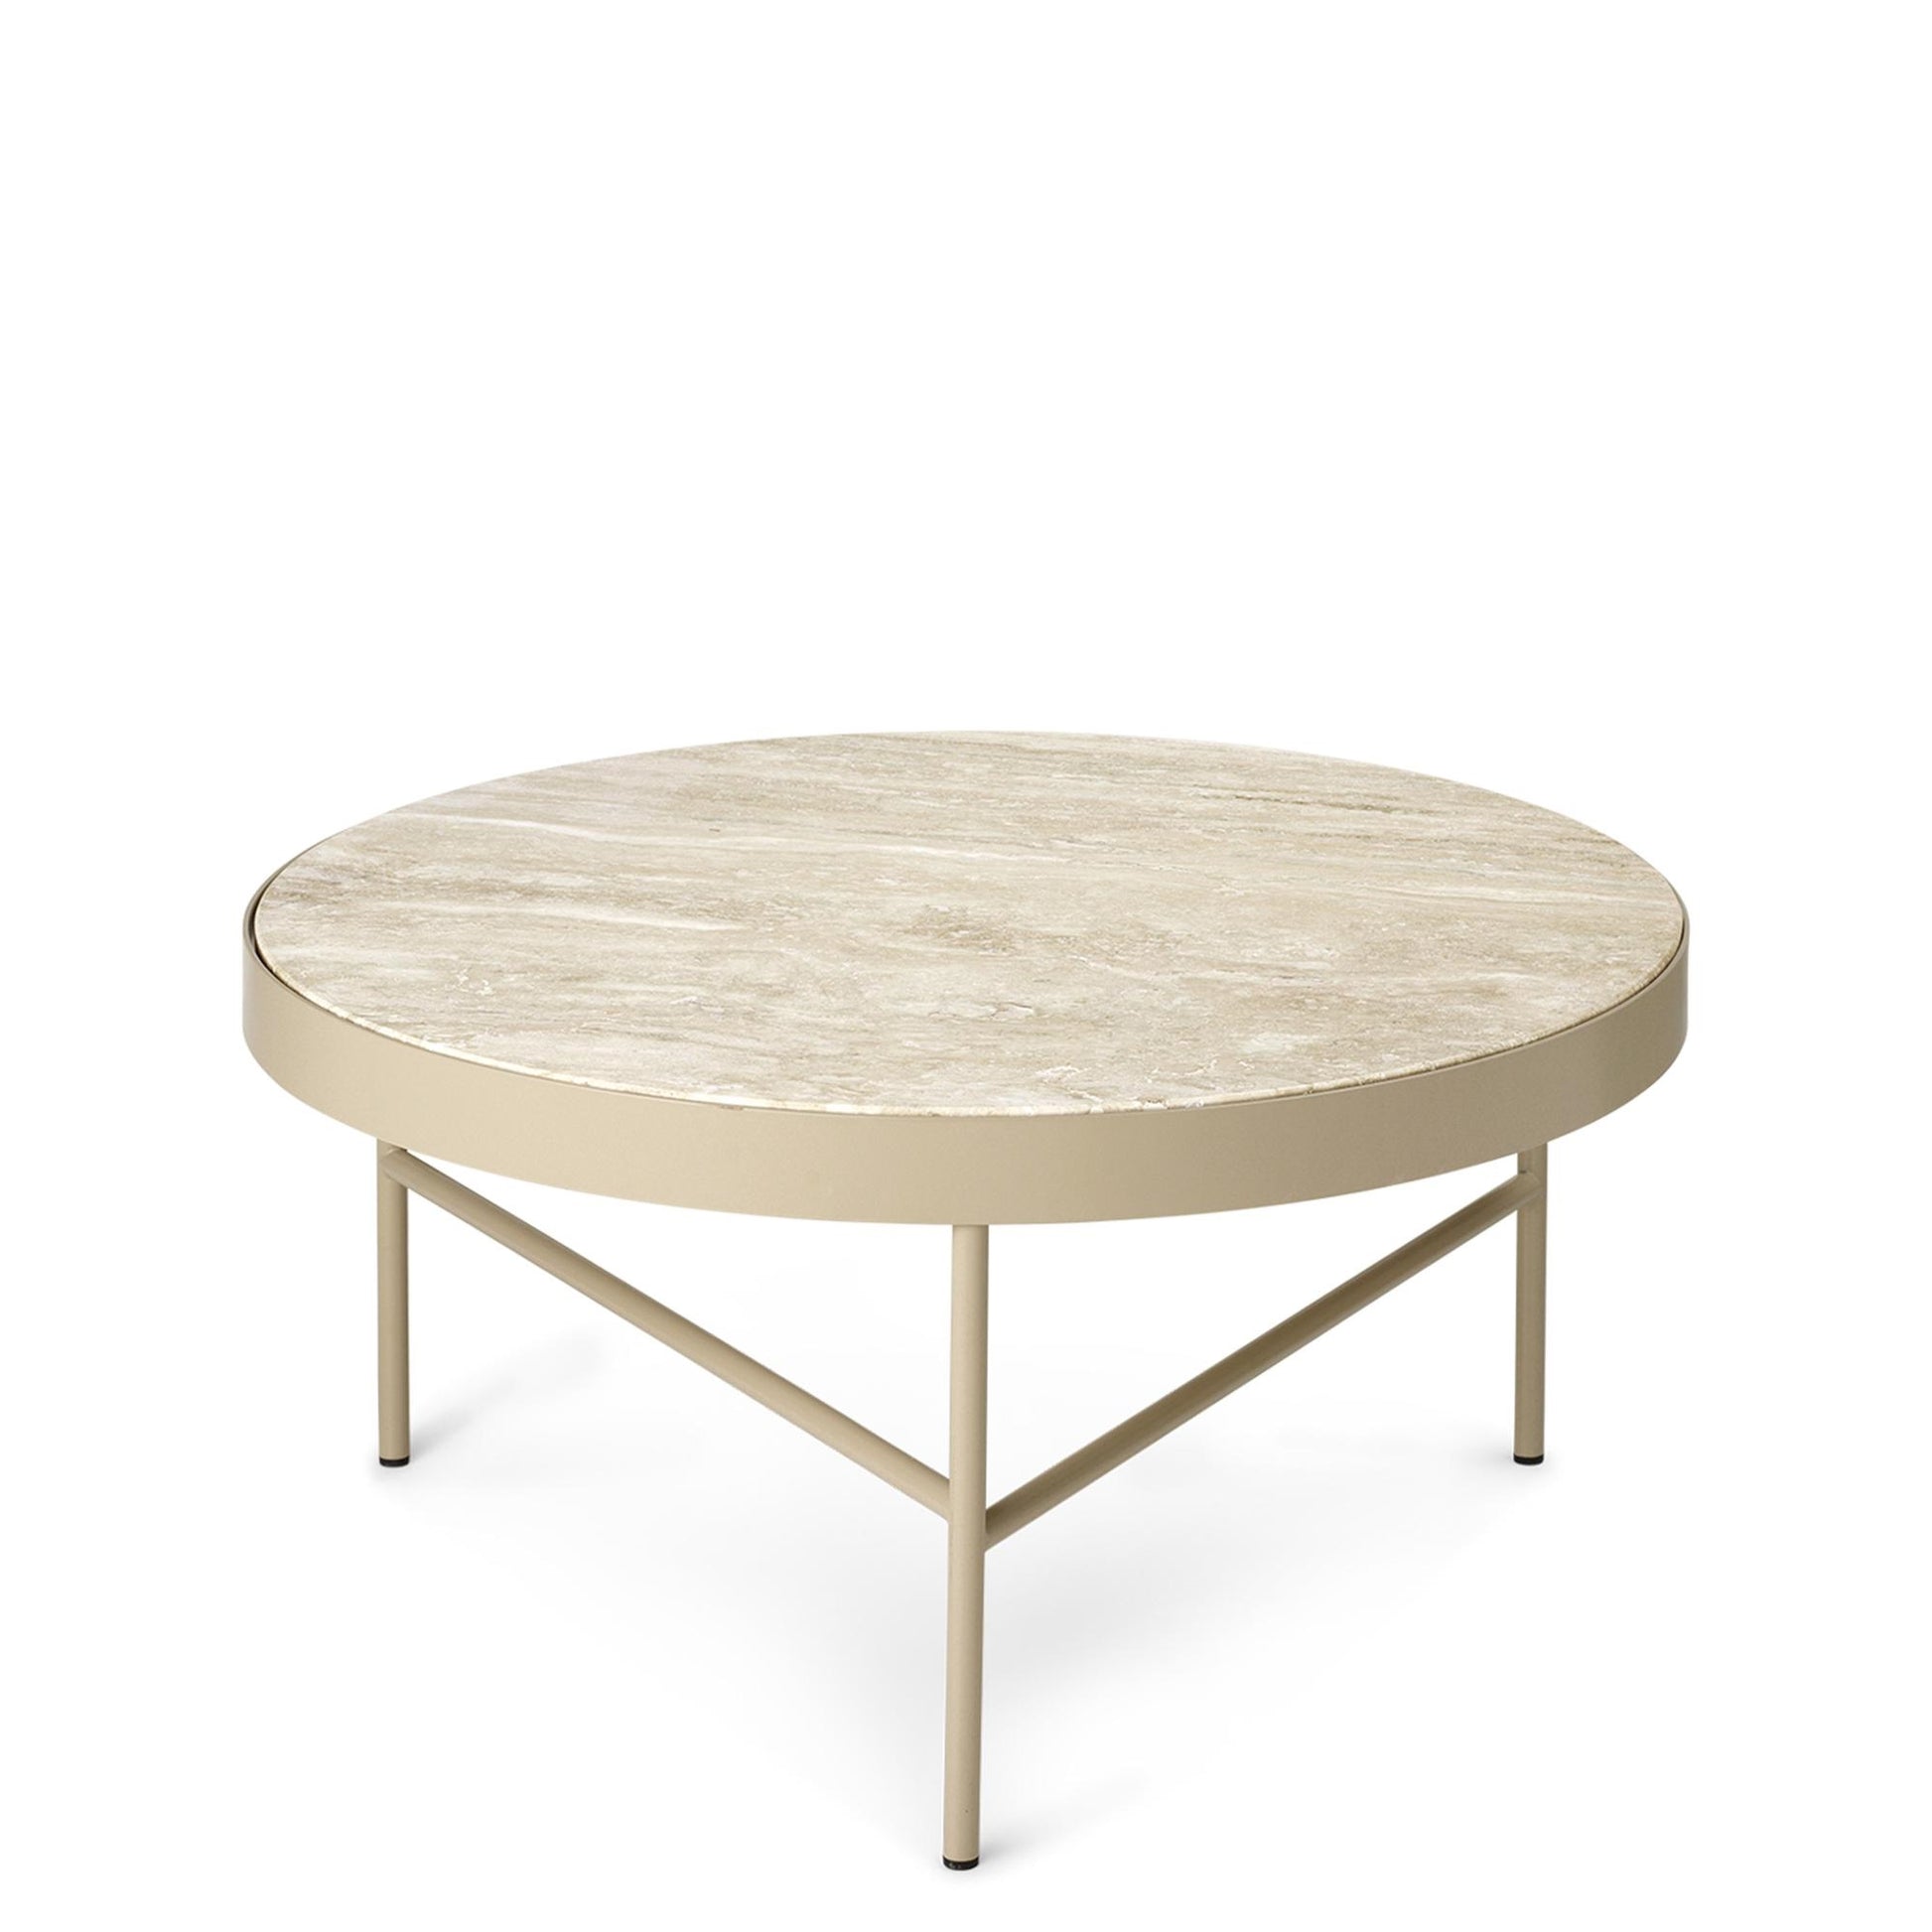 Travertine Coffee Table Large by Ferm Living #Cashmere